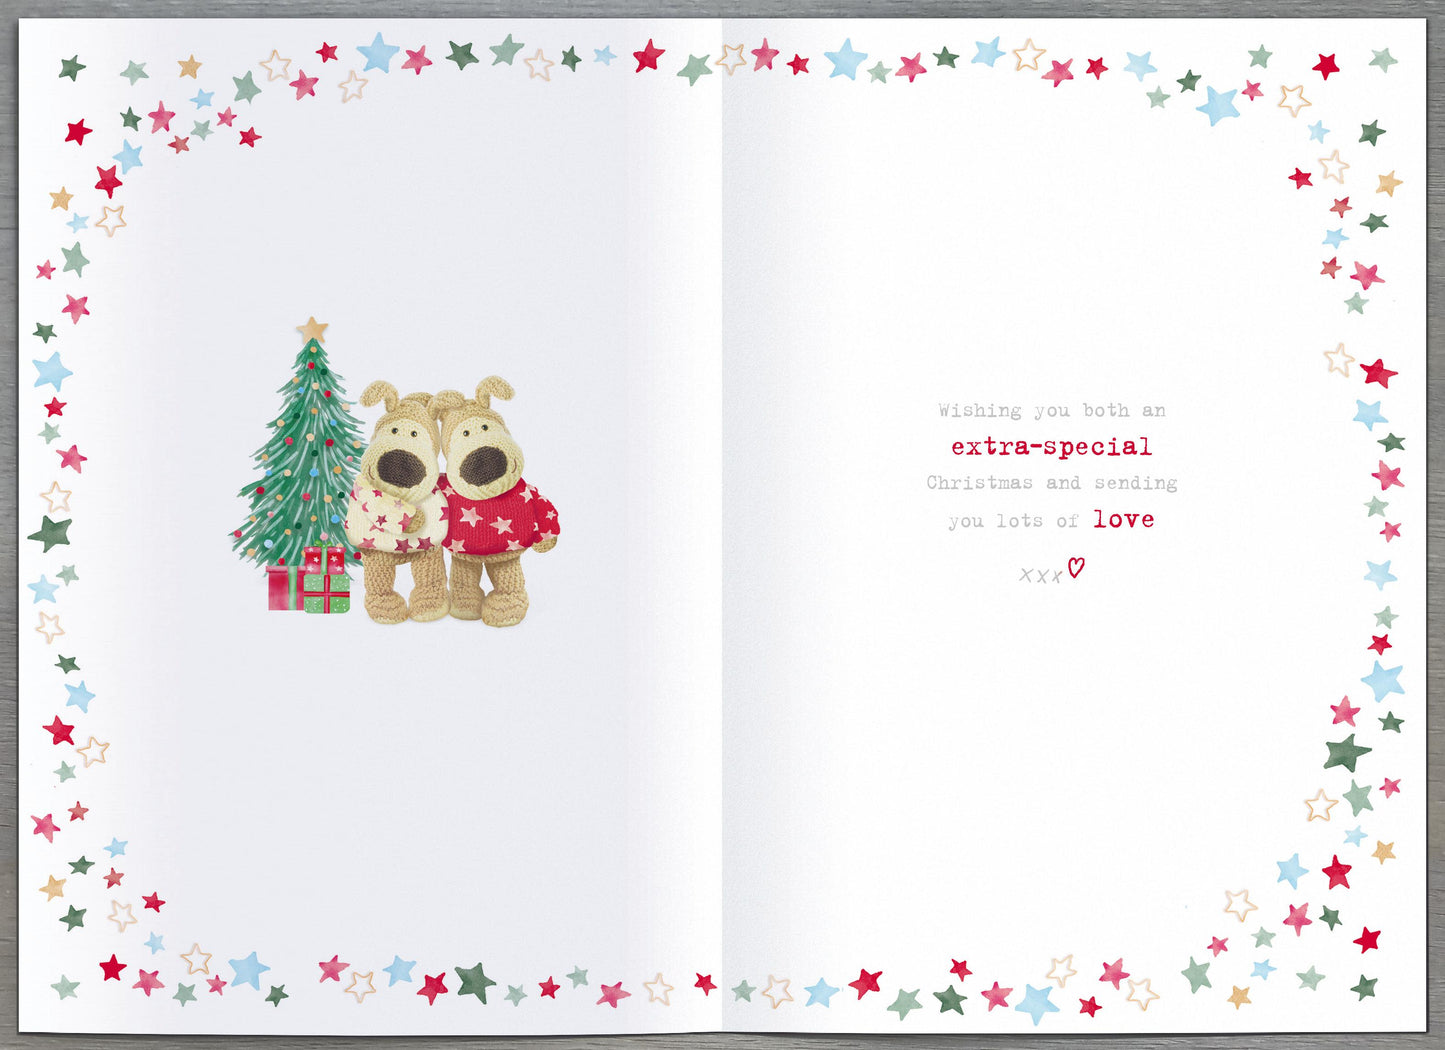 Boofle Brother & Sister-In-Law Embellished Christmas Greeting Card